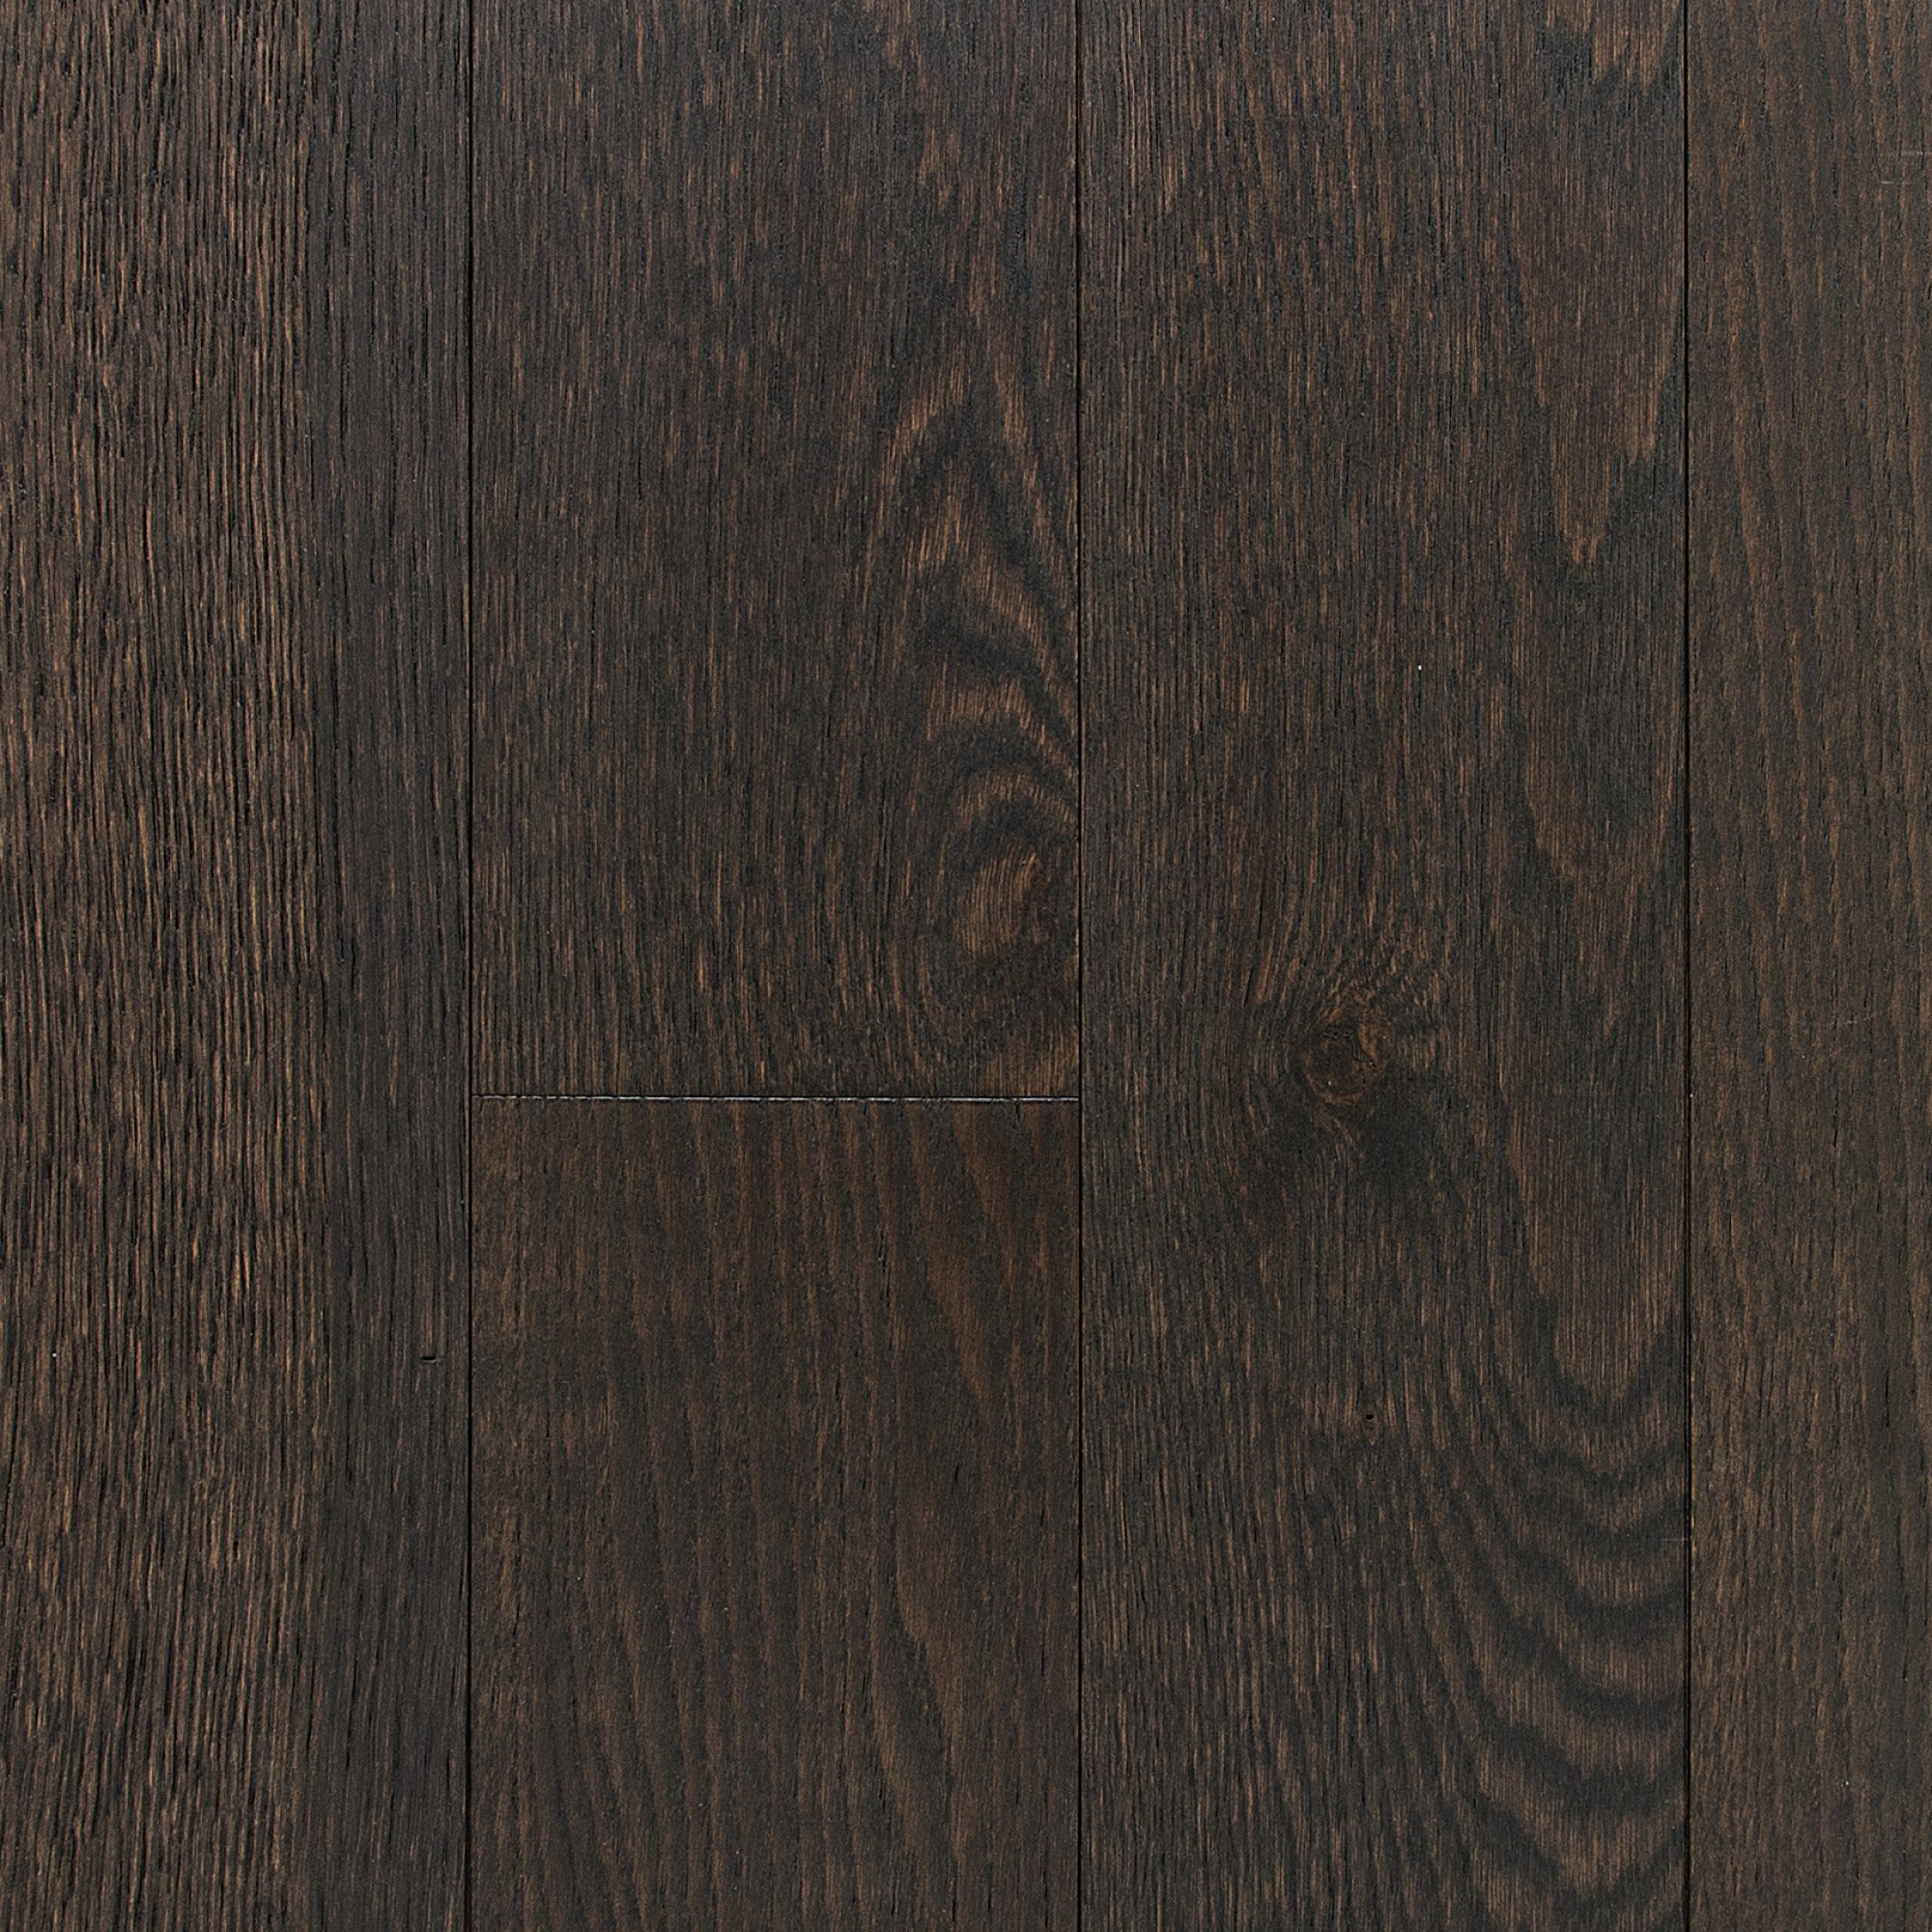 Vintage Northern Solid Sawn White Oak Baroque Wirebrushed 6 1/2" x 3/4" UVF Oil Character Grade